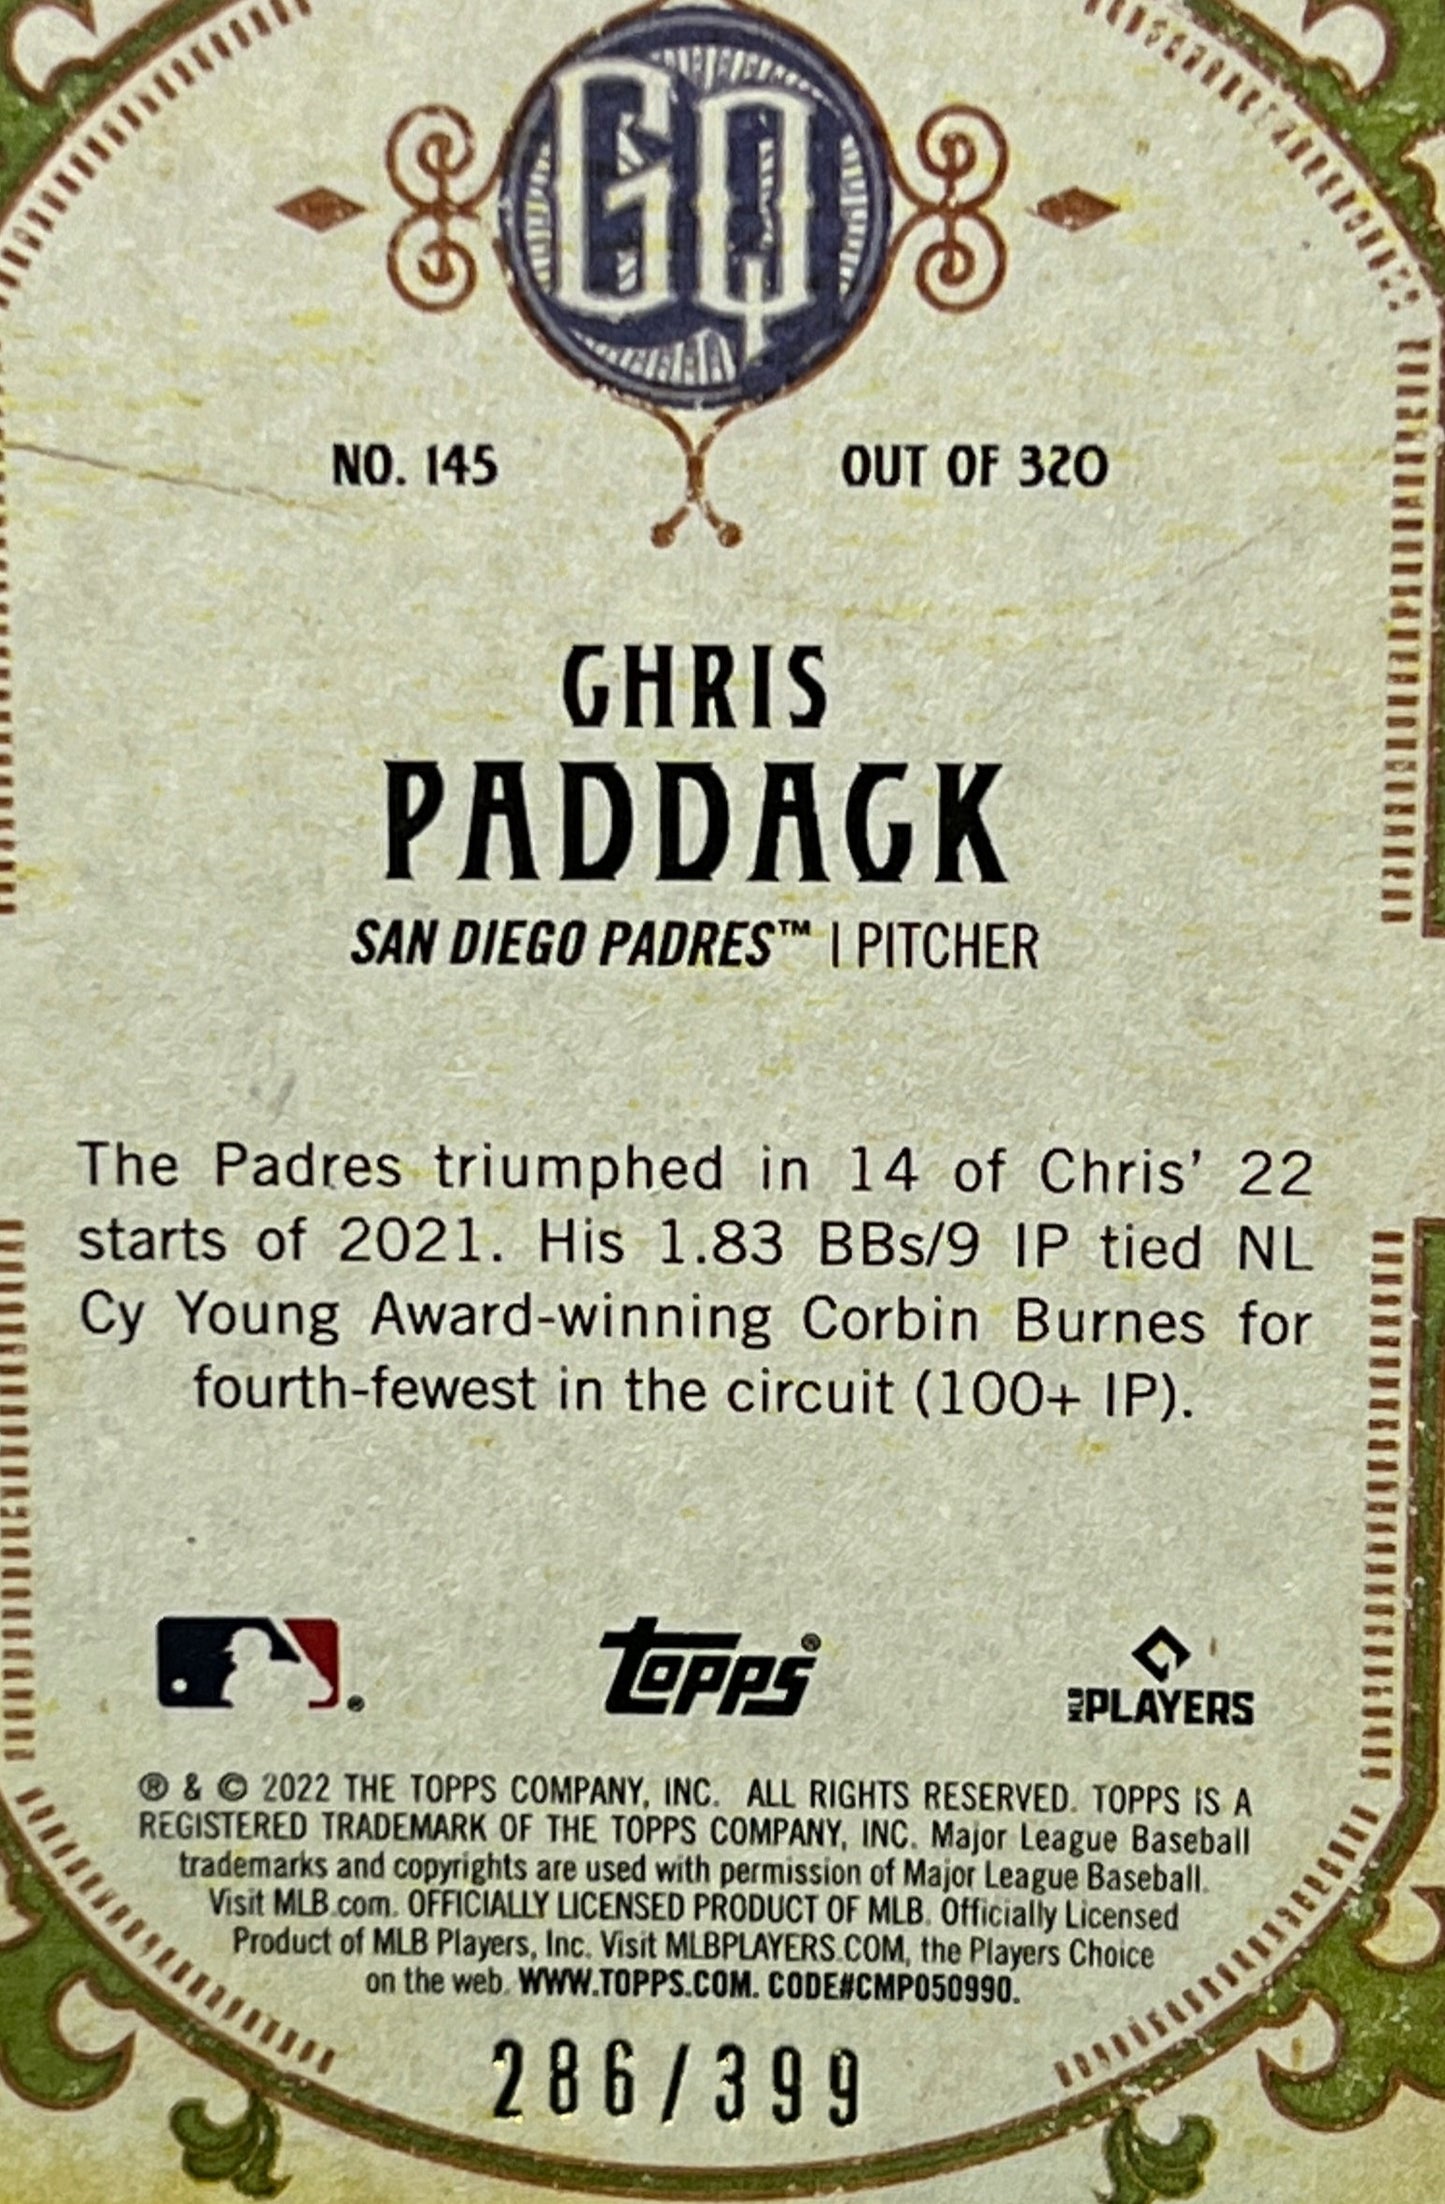 2022 TOPPS GYPSY QUEEN CHRIS PADDACK # 145 BROWN SAN DIEGO PADRES BASEBALL CARD